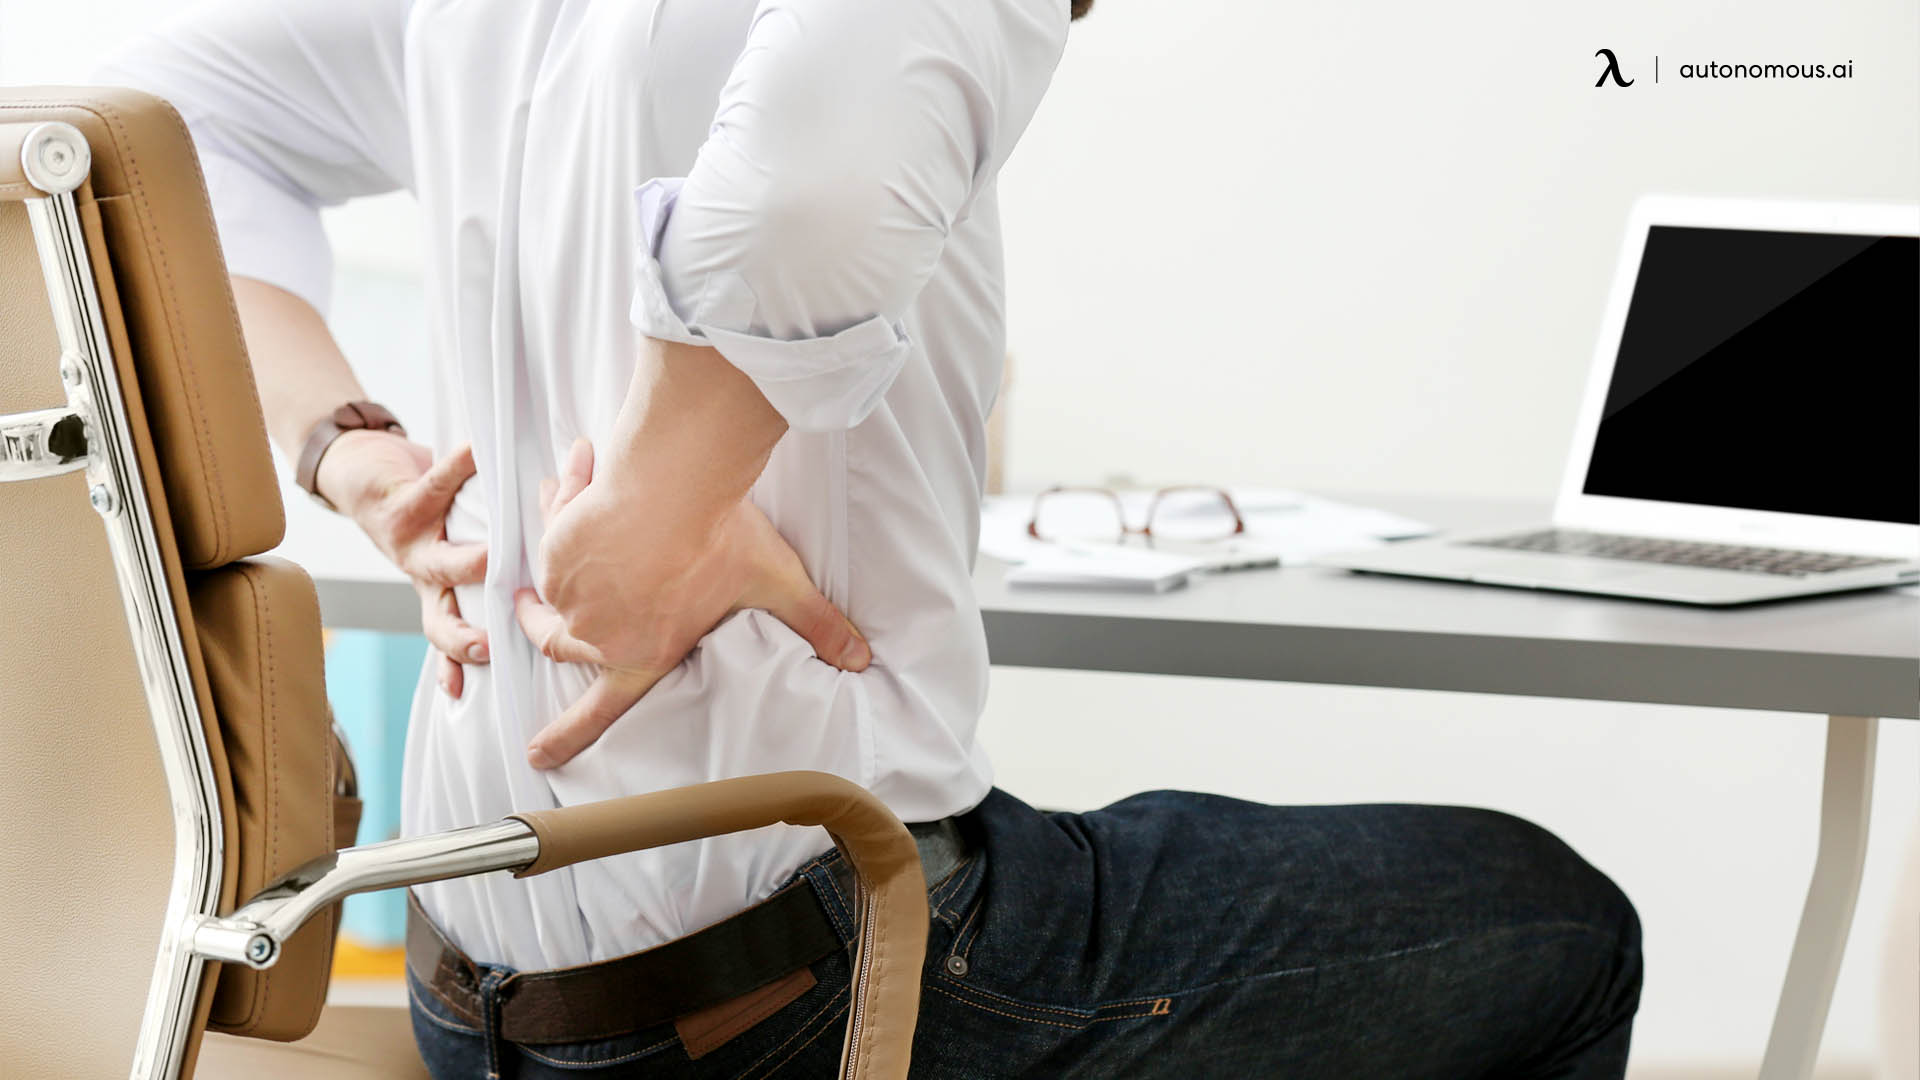 What Causes Back Pain at Work?